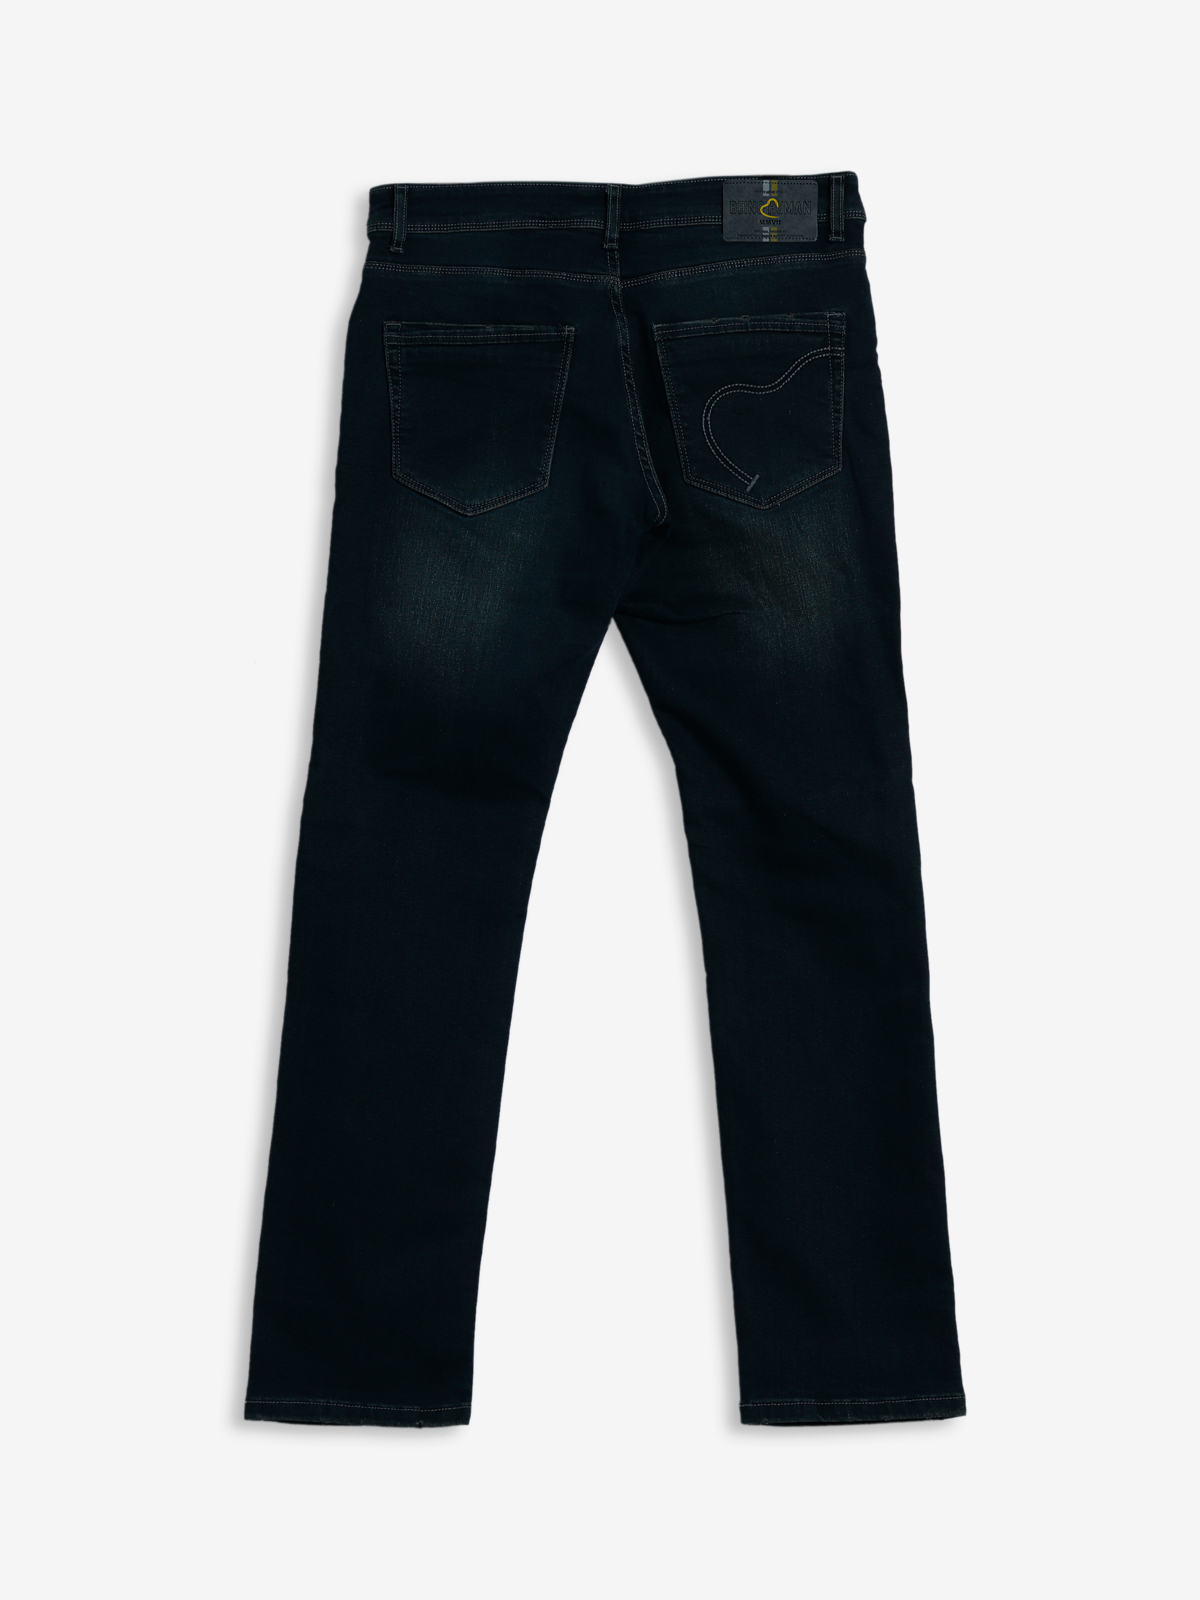 Buy Being Human Blue Cotton Regular Fit Jeans for Mens Online @ Tata CLiQ